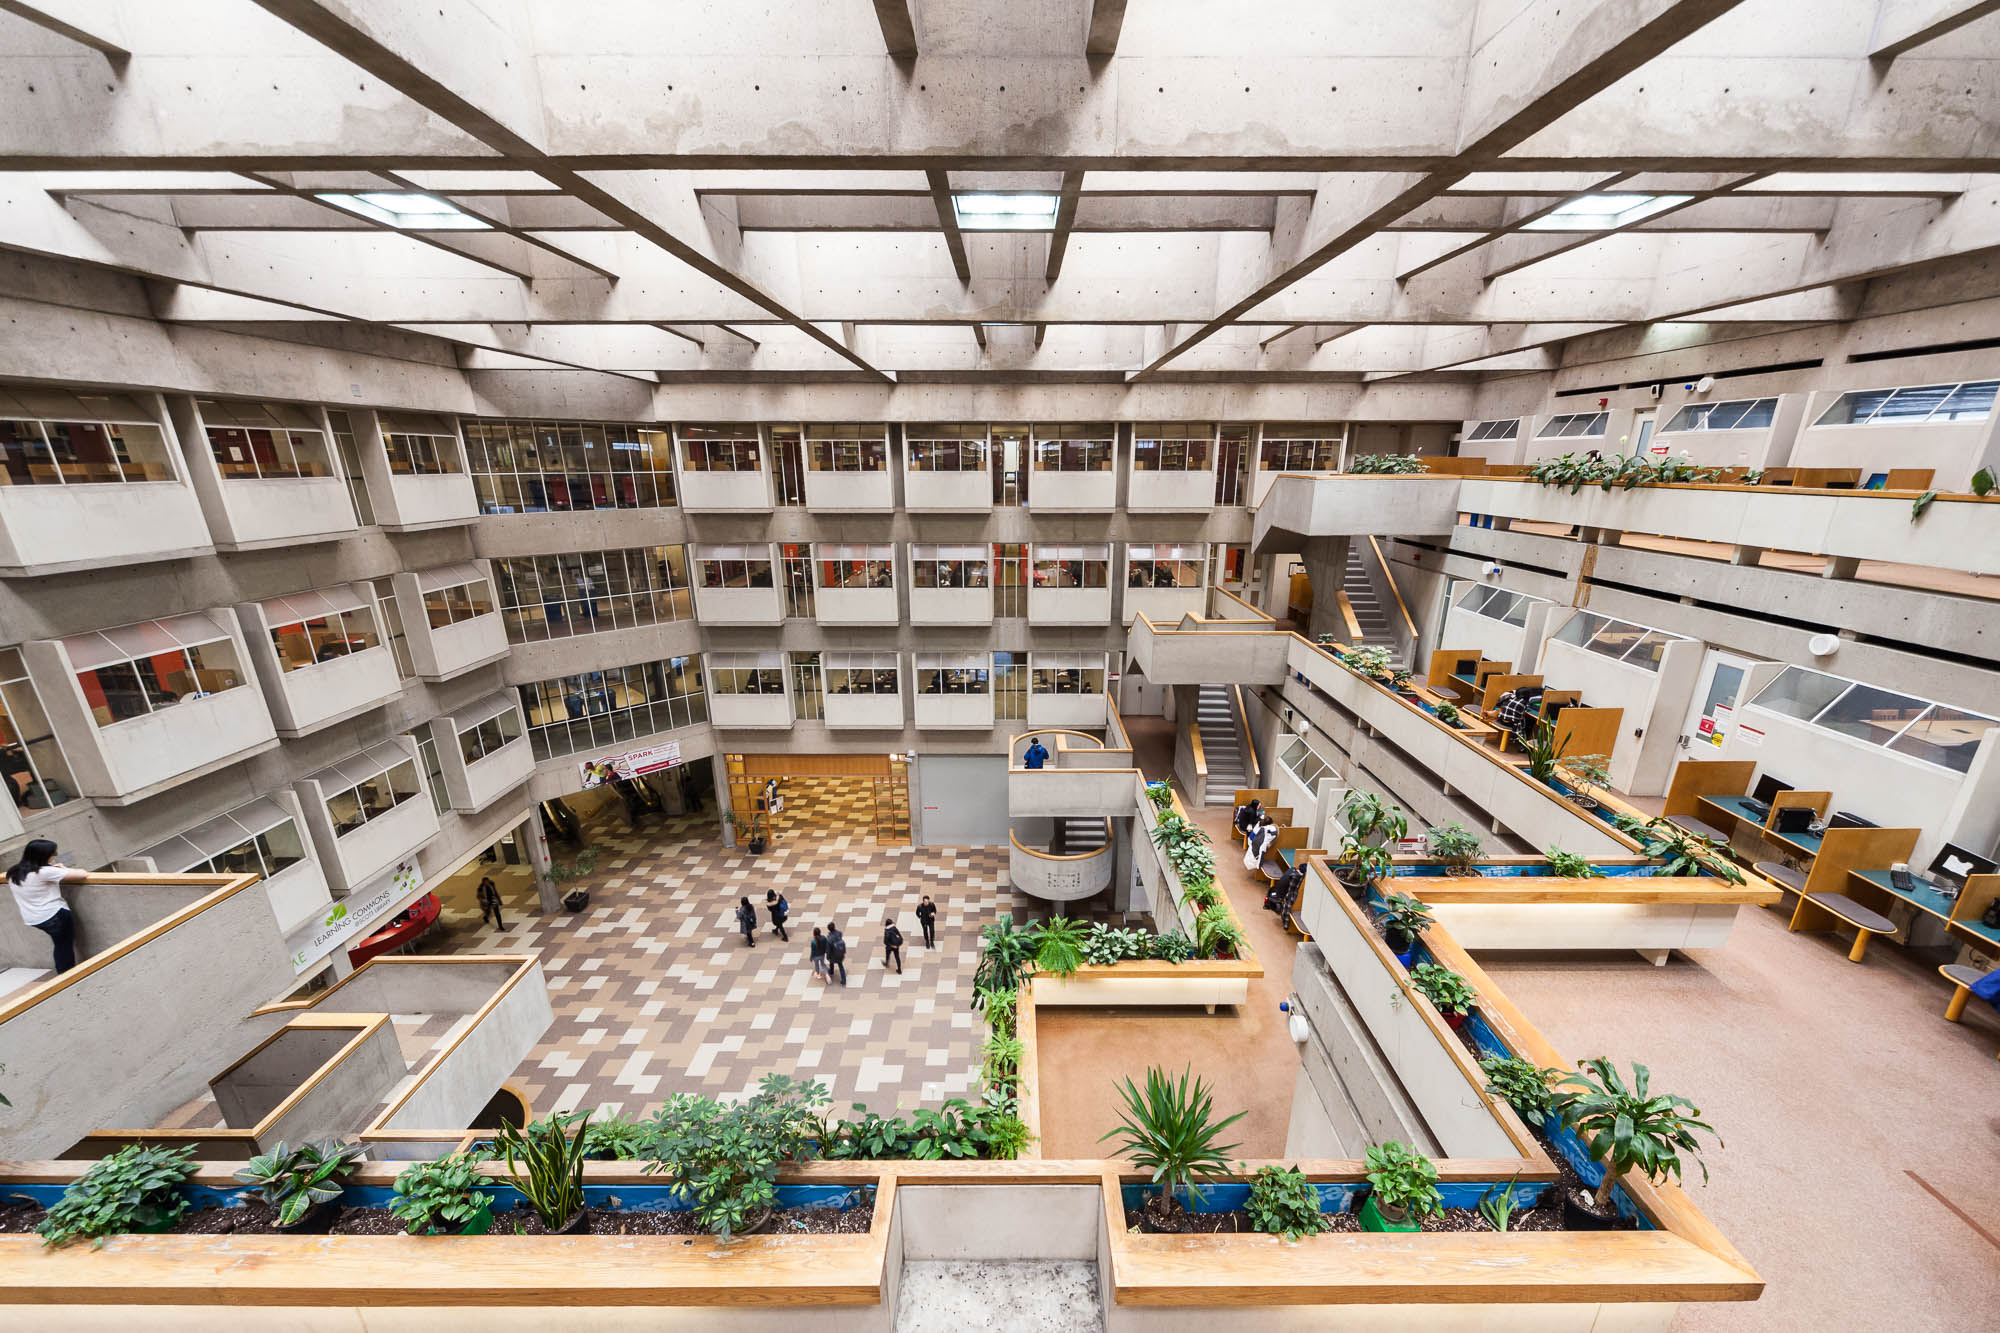 Interior of a brutalist library atrium, with cascading terraces lined with planters. Students are working at cubicles. Two sets of boxy staircases lead from one level to another. People are seen crossing the atrium below, on top of one the staircase in the foreground, a figure with long hair watches from above.